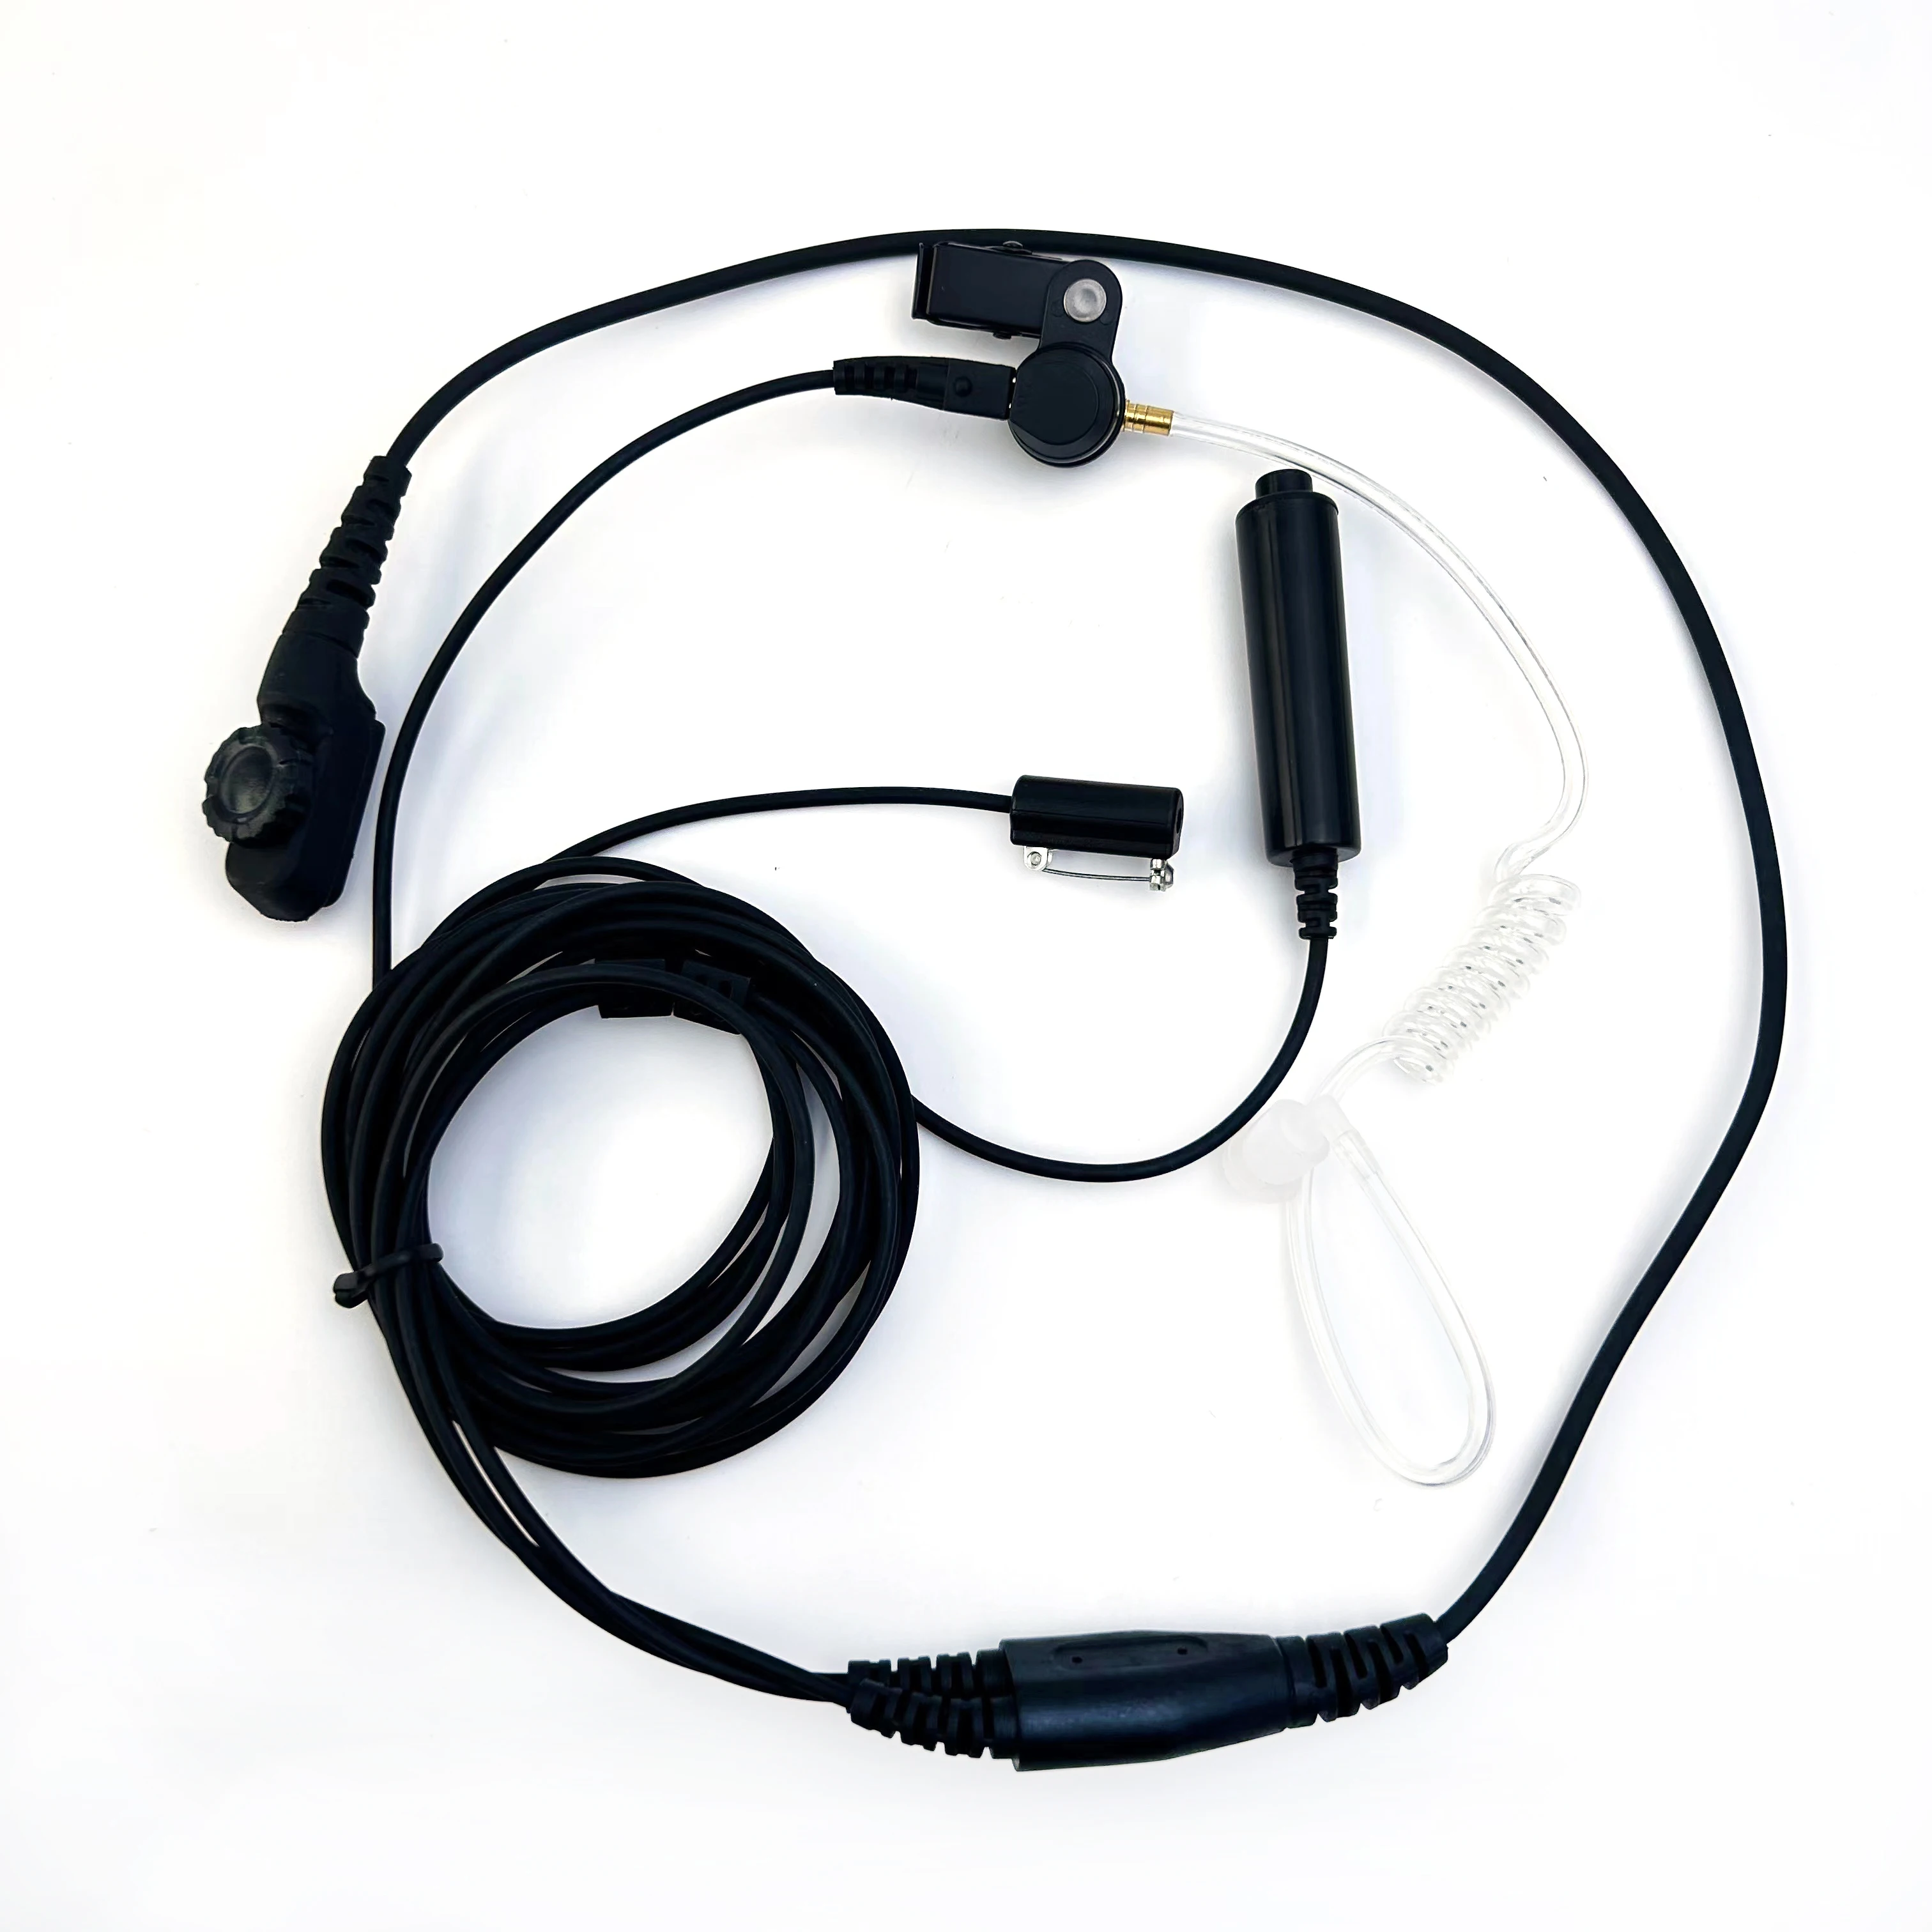 Hytera walkie talkie headset Compatible with Hytera Radios PD580 PD700 PD700G PD702 PD702G PD705 PD705G PD708 PD752